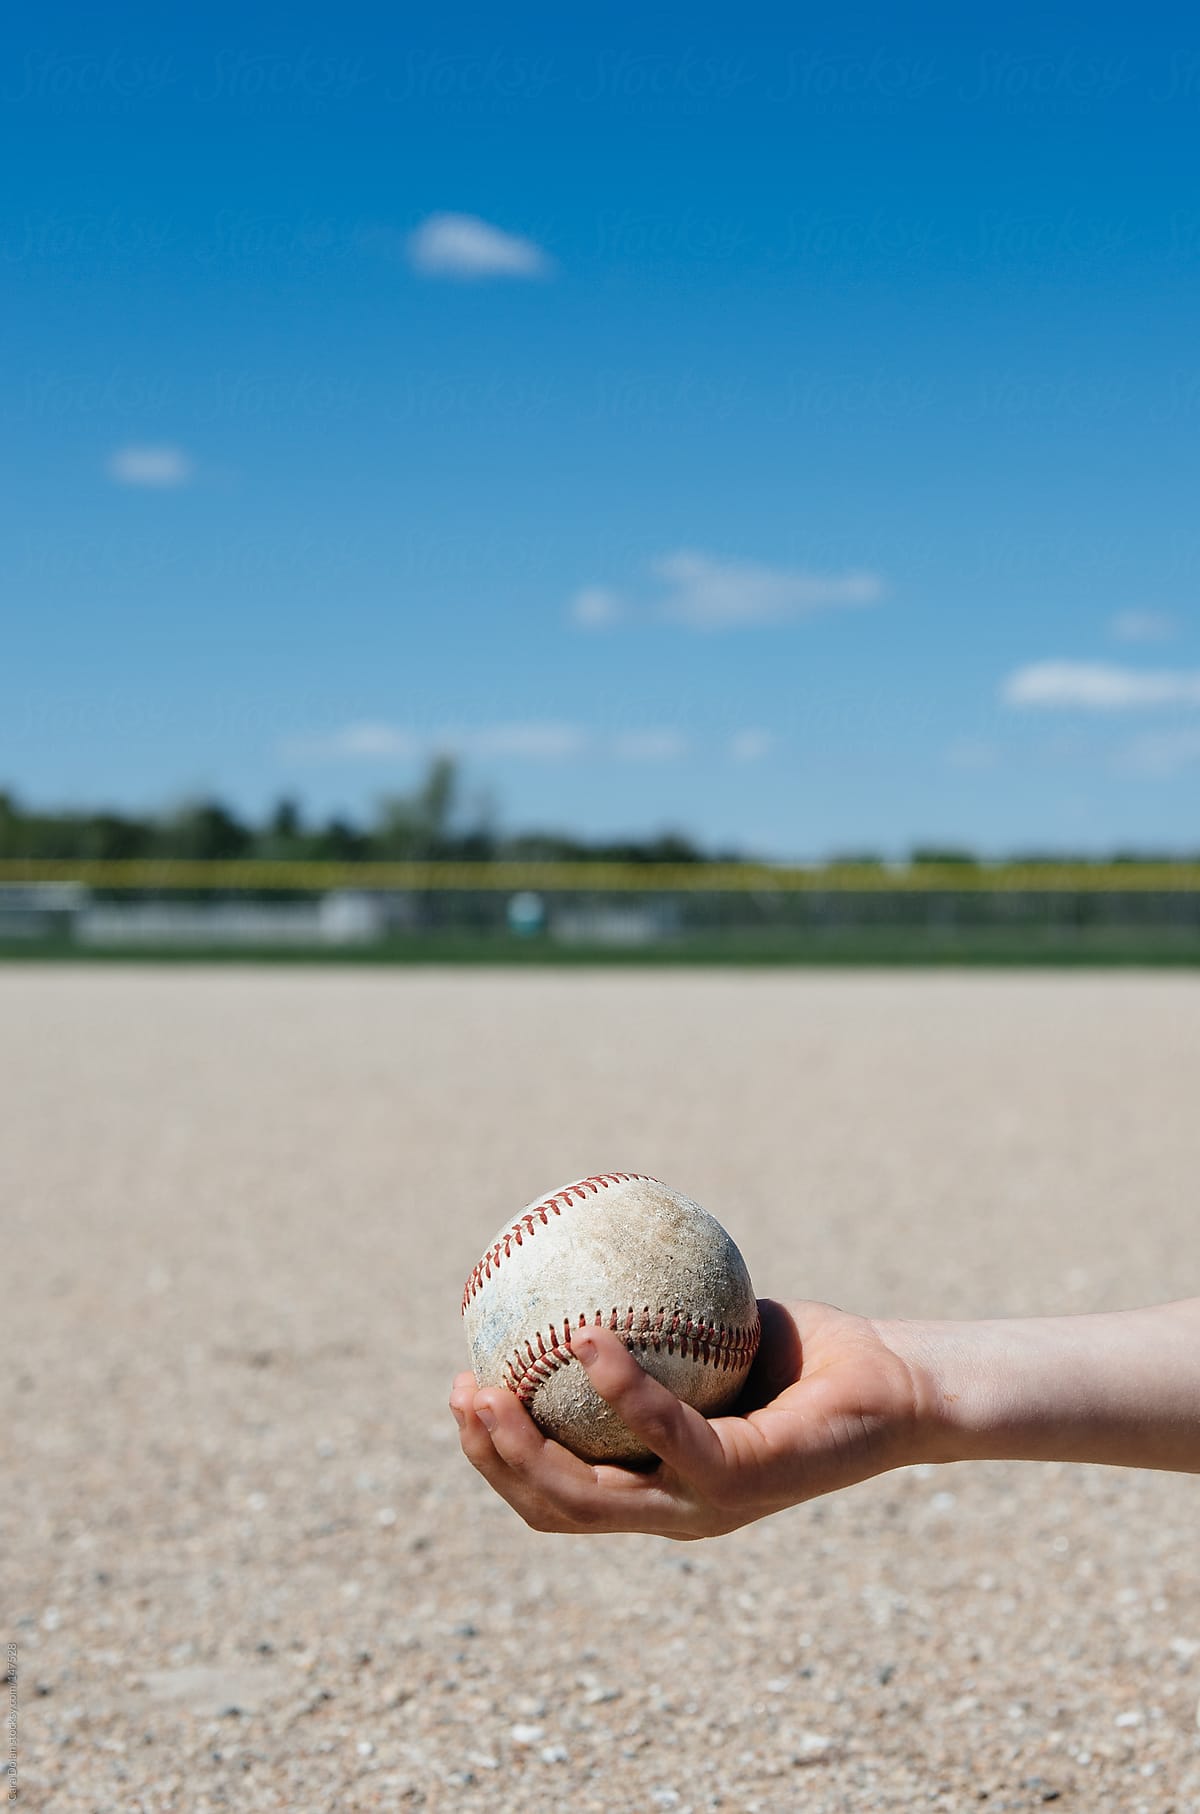 Child\'s arm with baseball on athletic field